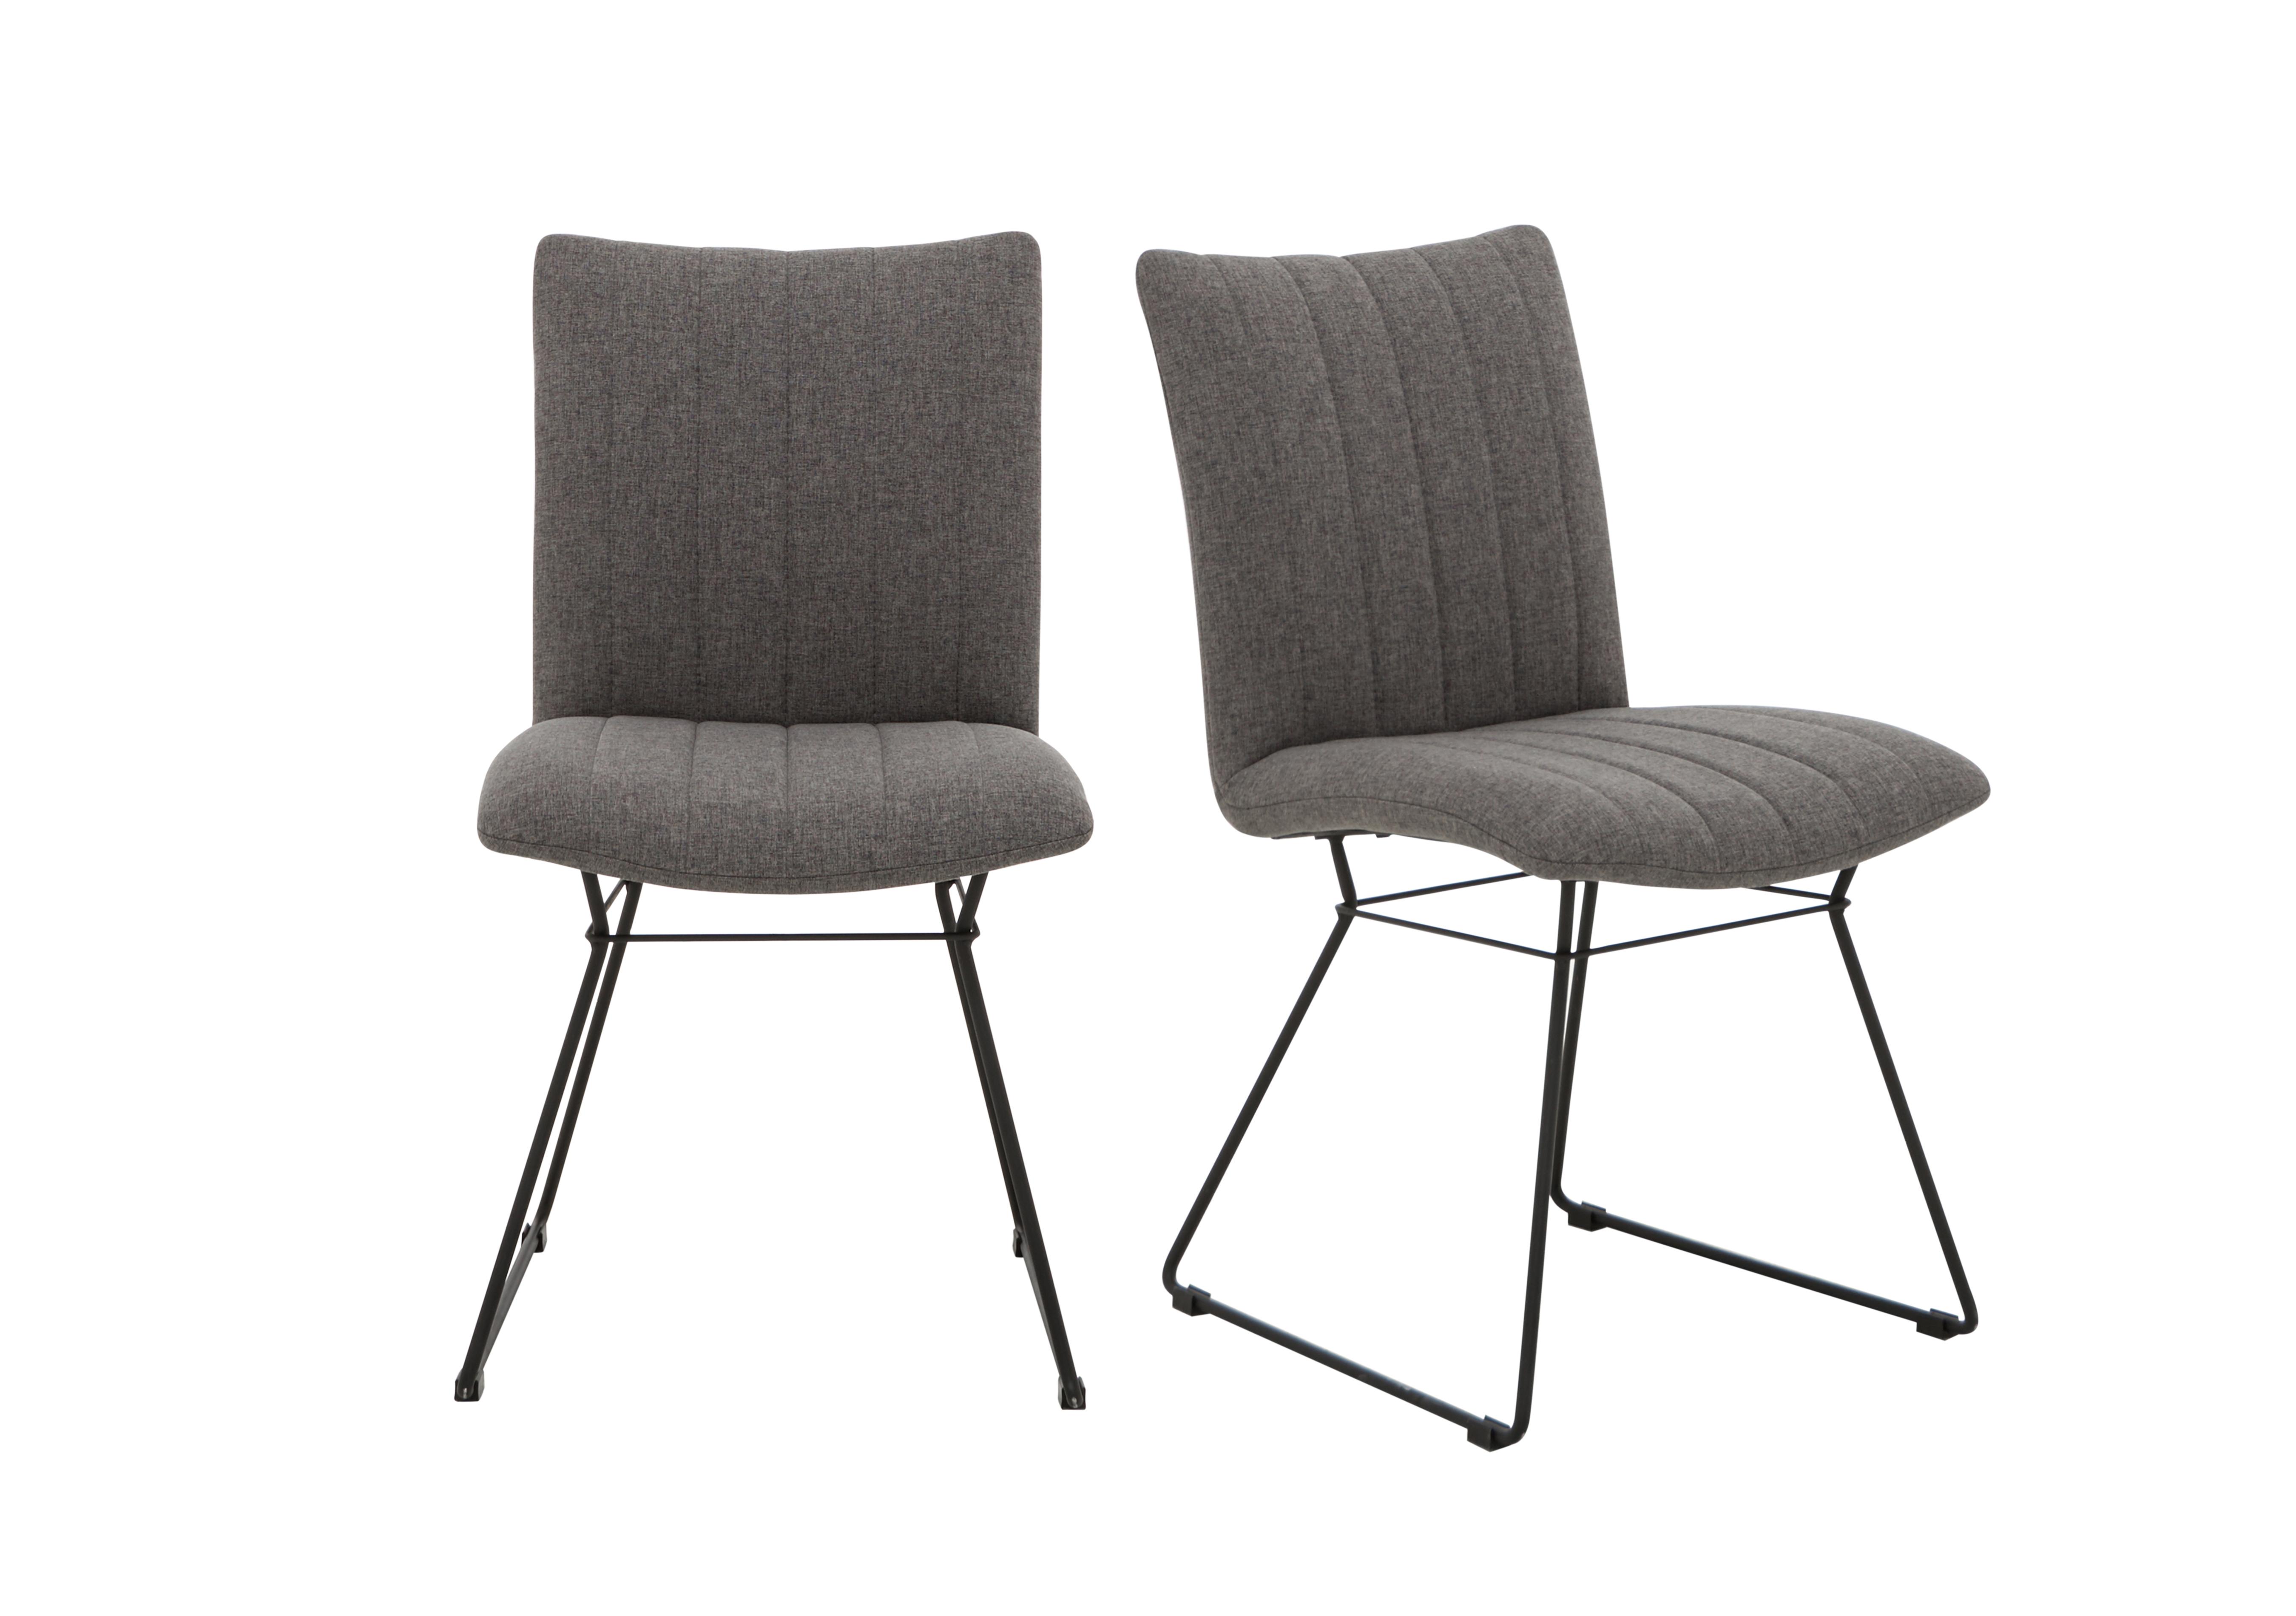 Ace Pair of Dining Chairs in Grey on Furniture Village